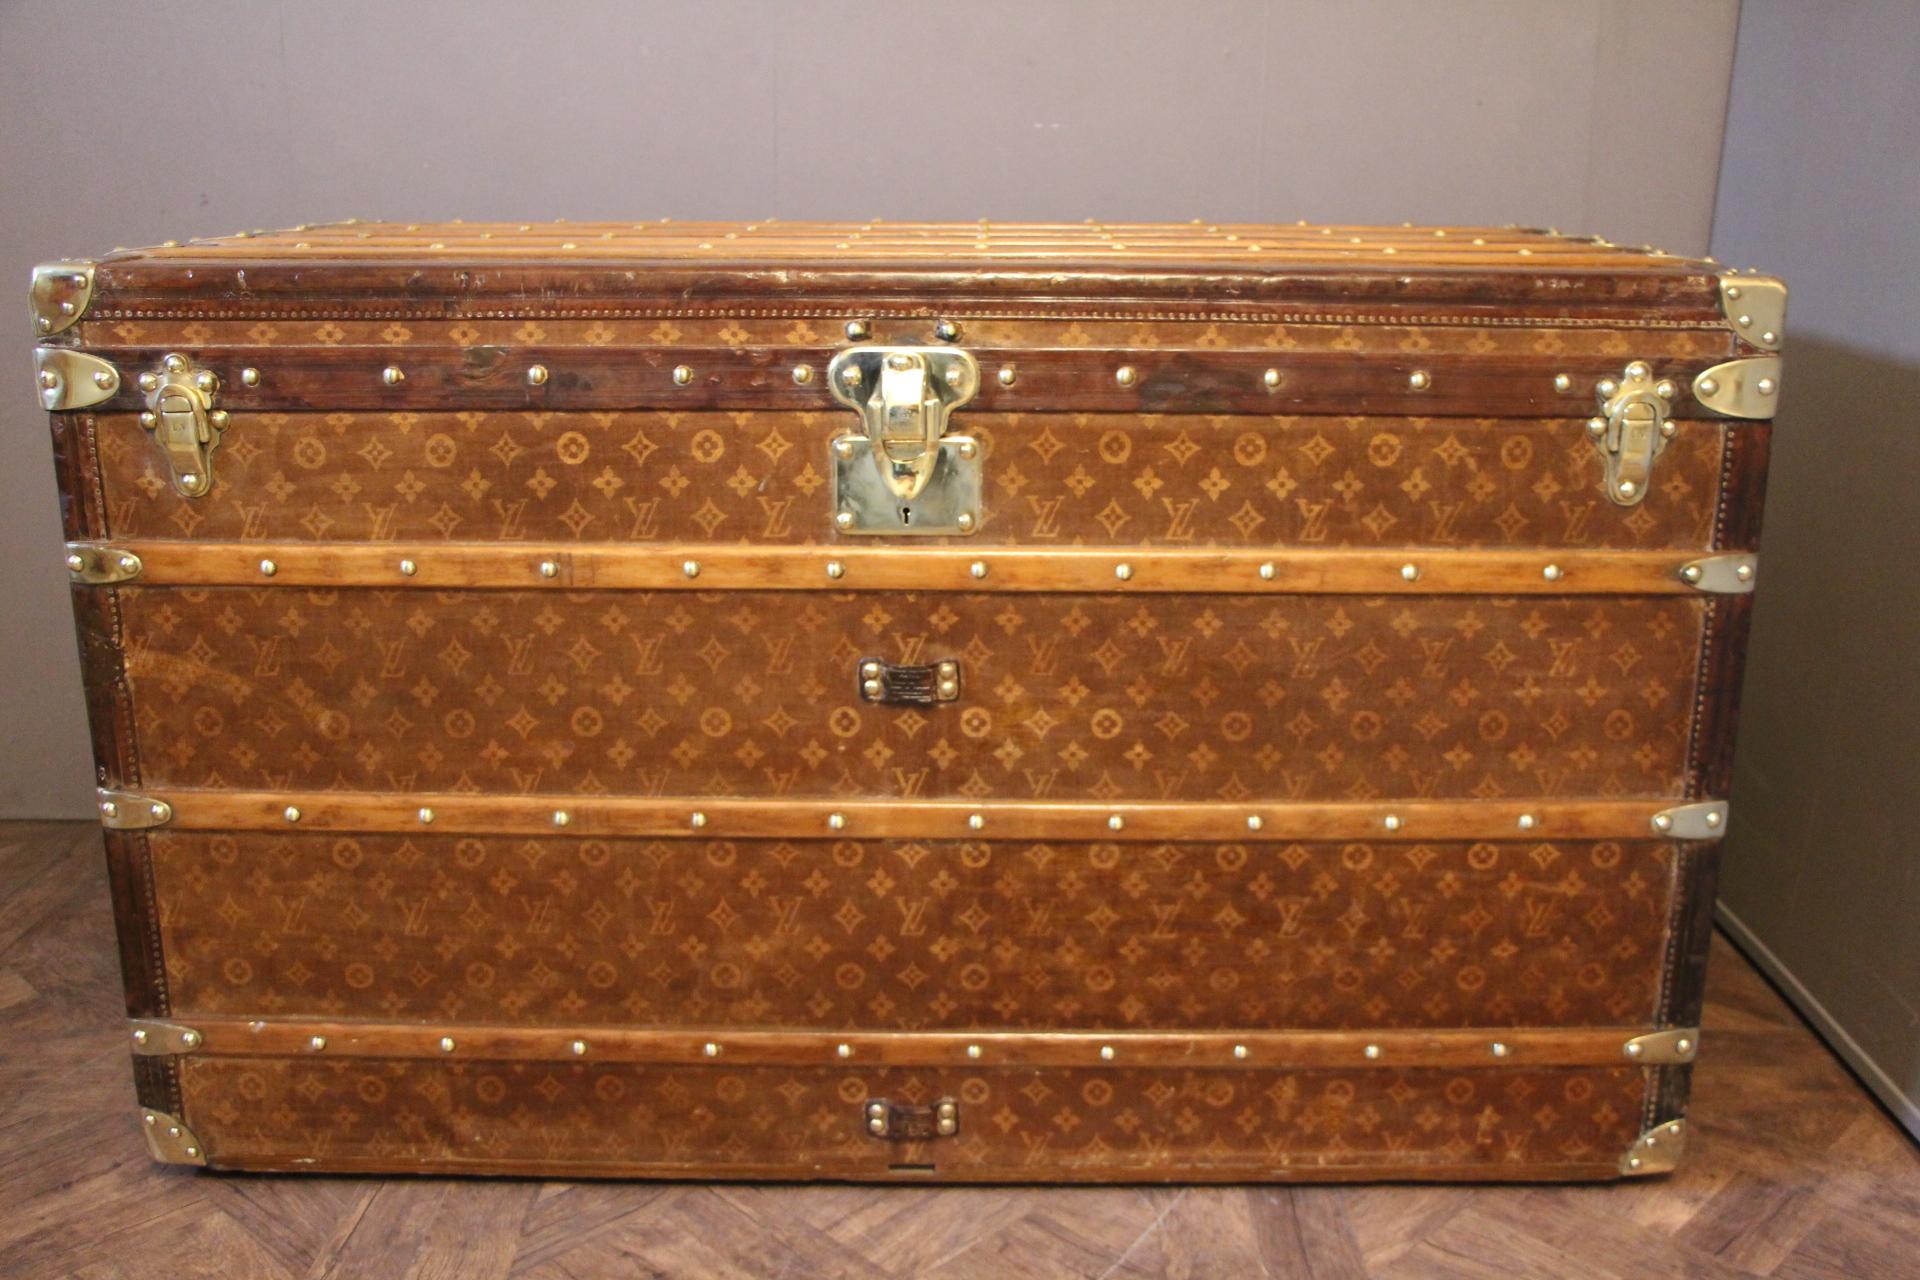 This is an unusual extra large Louis Vuitton courrier trunk featuring woven monogram canvas, leather trim, solid brass Louis Vuitton stamped locks, studs and side handles. Very unique dimensions, certainly a special order.
It has got a very warm